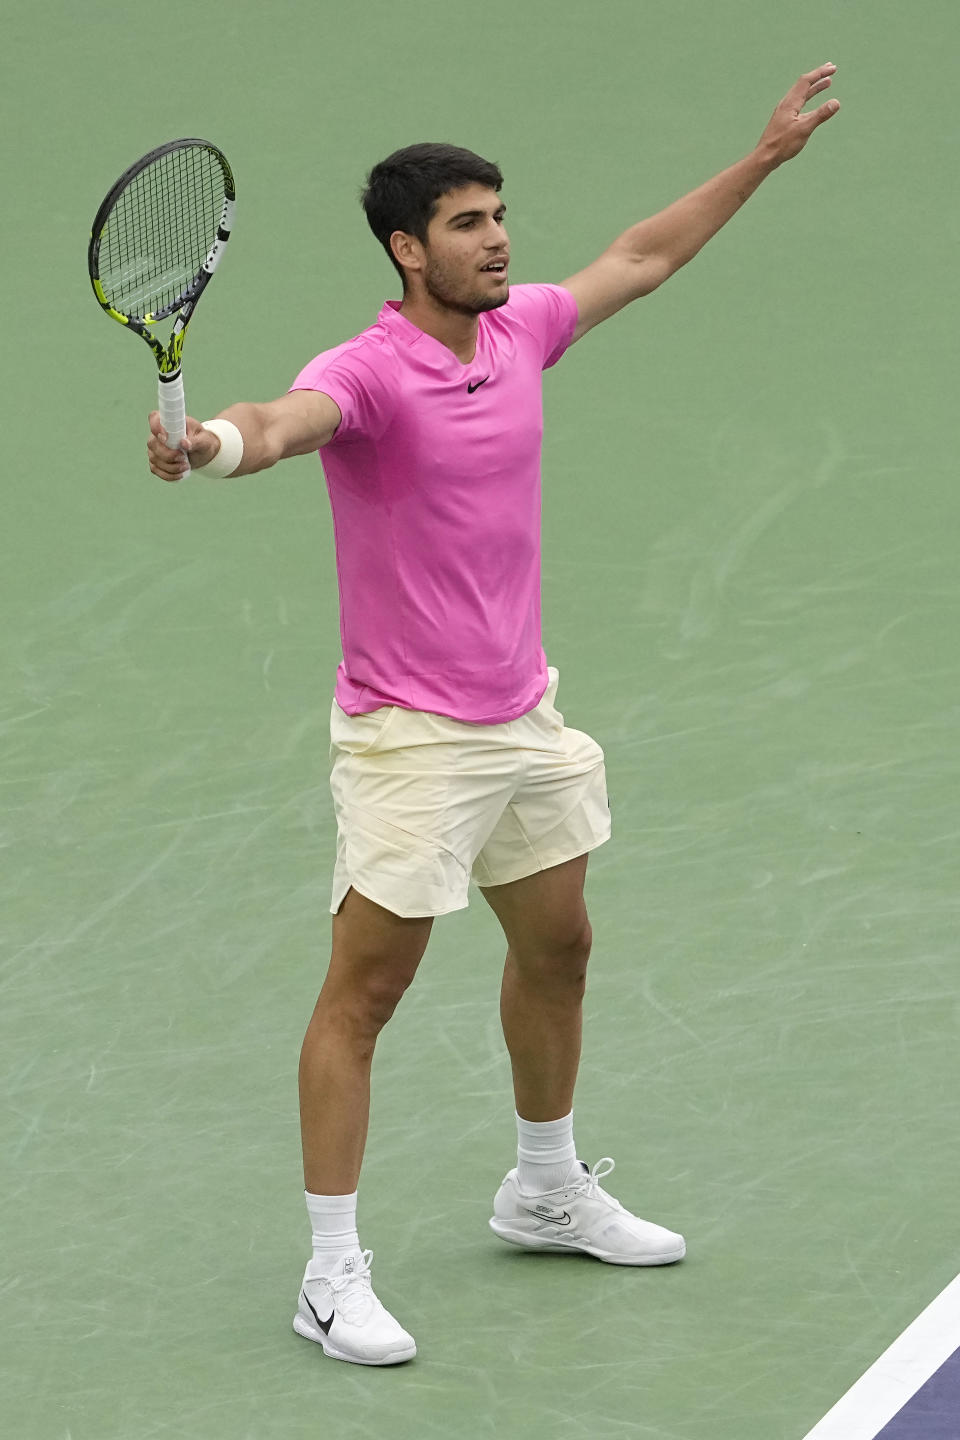 Carlos Alcaraz, of Spain, celebrates after defeating Daniil Medvedev, of Russia, during the men's singles final at the BNP Paribas Open tennis tournament Sunday, March 19, 2023, in Indian Wells, Calif. (AP Photo/Mark J. Terrill)